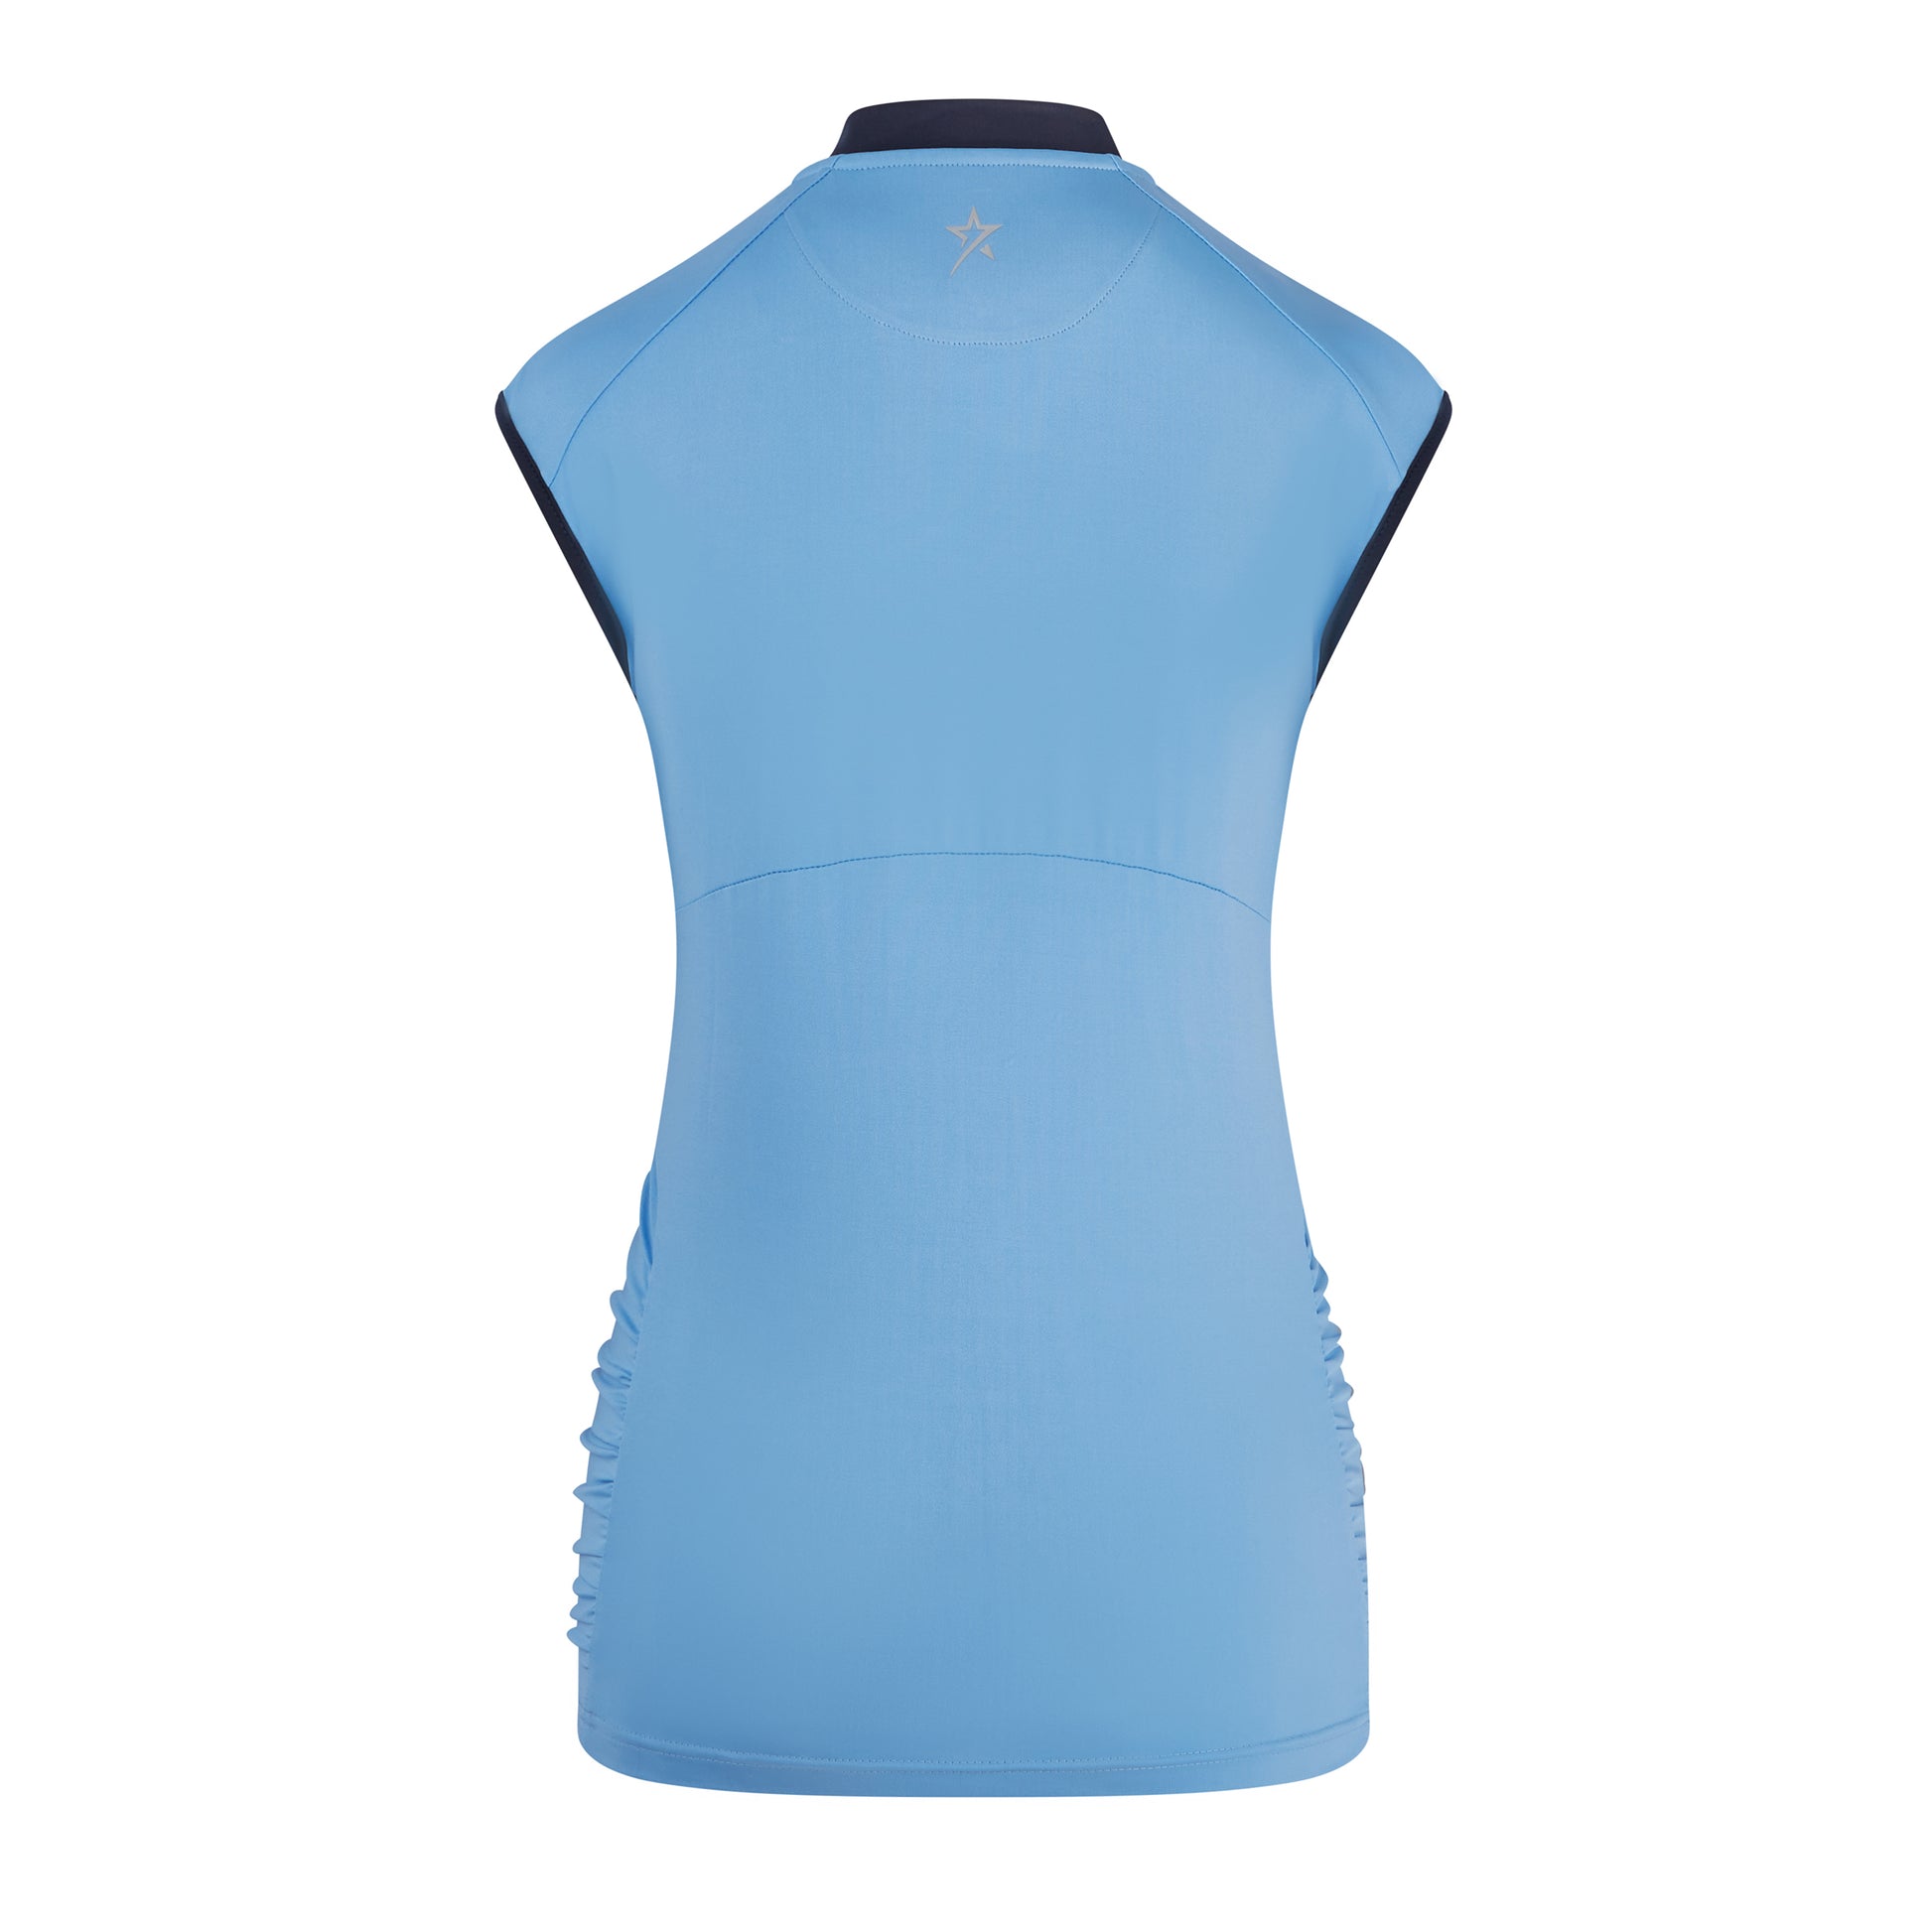 Swing Out Sister Ladies Cap Sleeve Polo with Ruched detail in Tranquil Blue